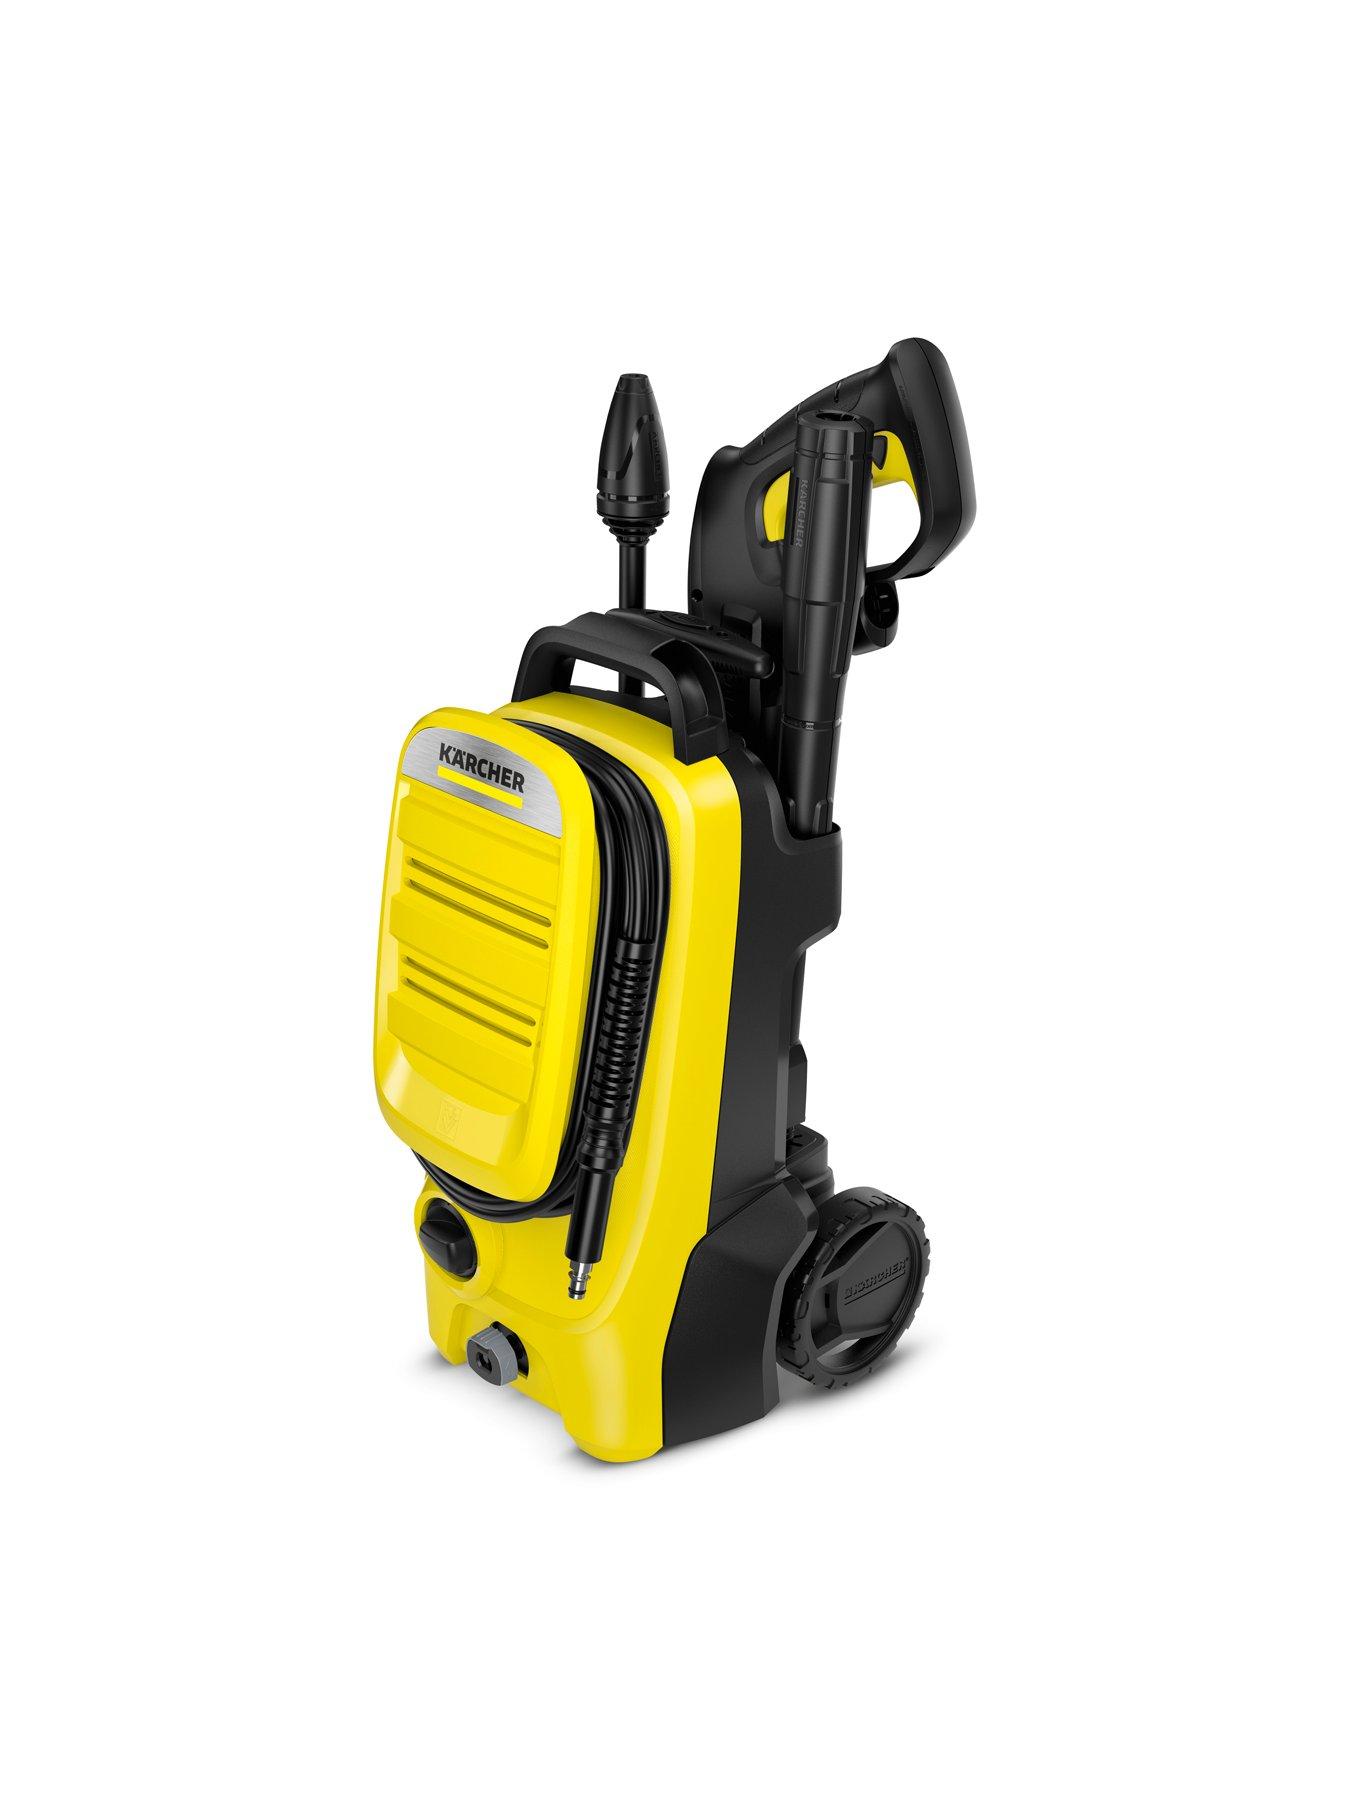 KARCHER K4 Compact: Unboxing and SETUP in Just 4 Minutes (Easy) 